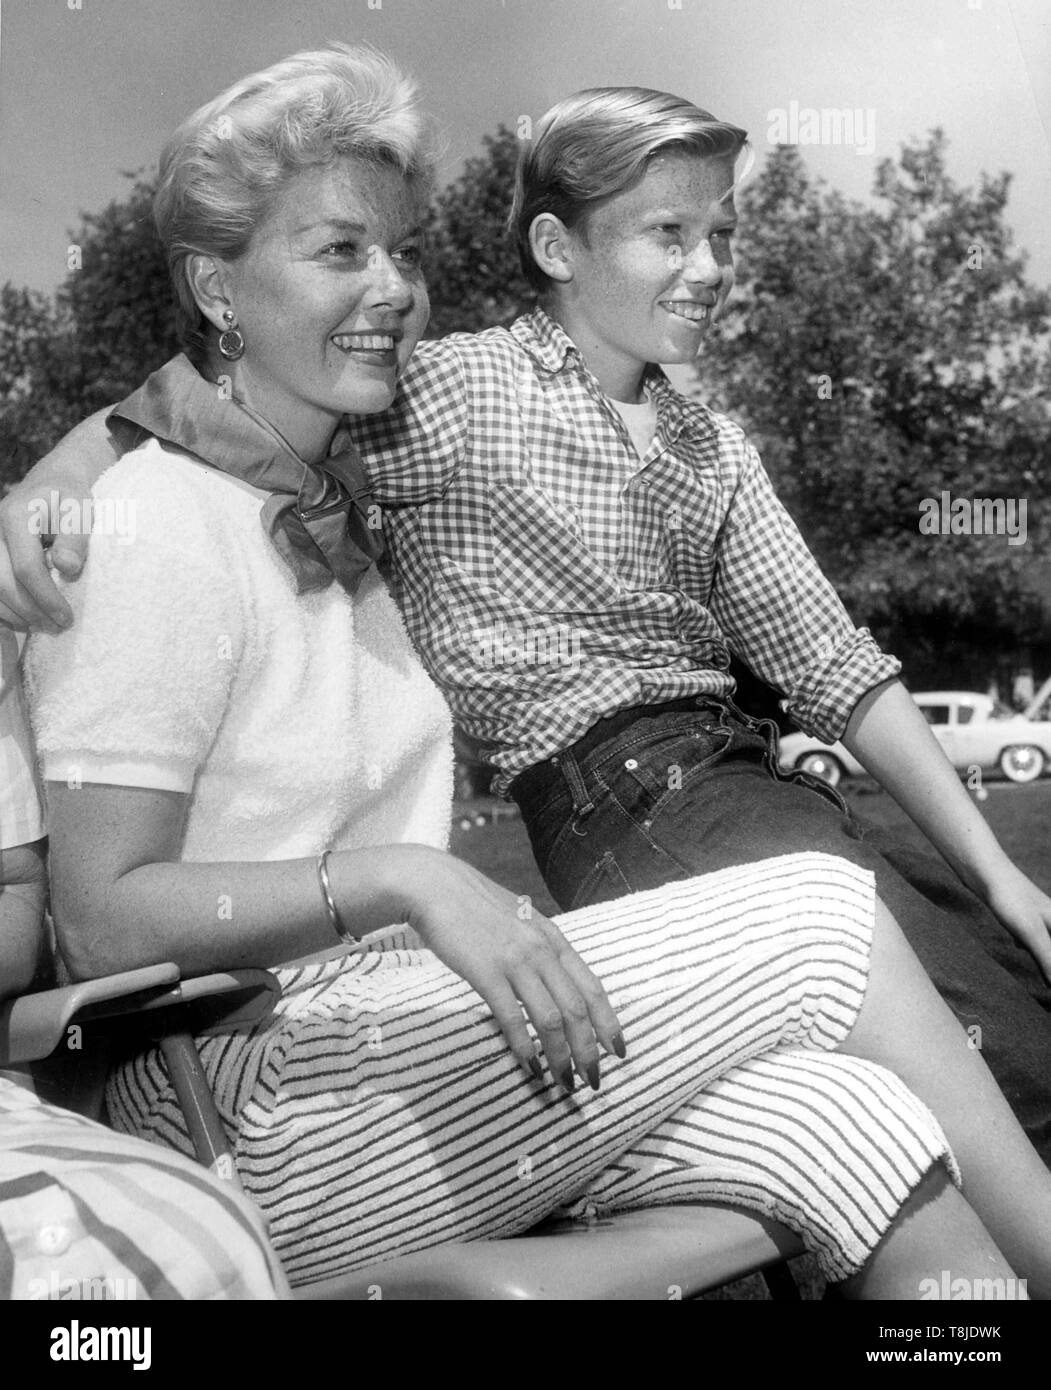 May 13, 2019: File Photo: DORIS DAY, the perennial girl-next-door whose career as a singer and actress spanned almost 50 years and made her one of the biggest Hollywood stars and most popular entertainers in the United States has died. She was 97. PICTURED: DORIS DAY and her son TERRY MELCHER circa early 1950's. (Credit Image: © Allan S. Adler/Globe Photos via ZUMA Wire) Stock Photo